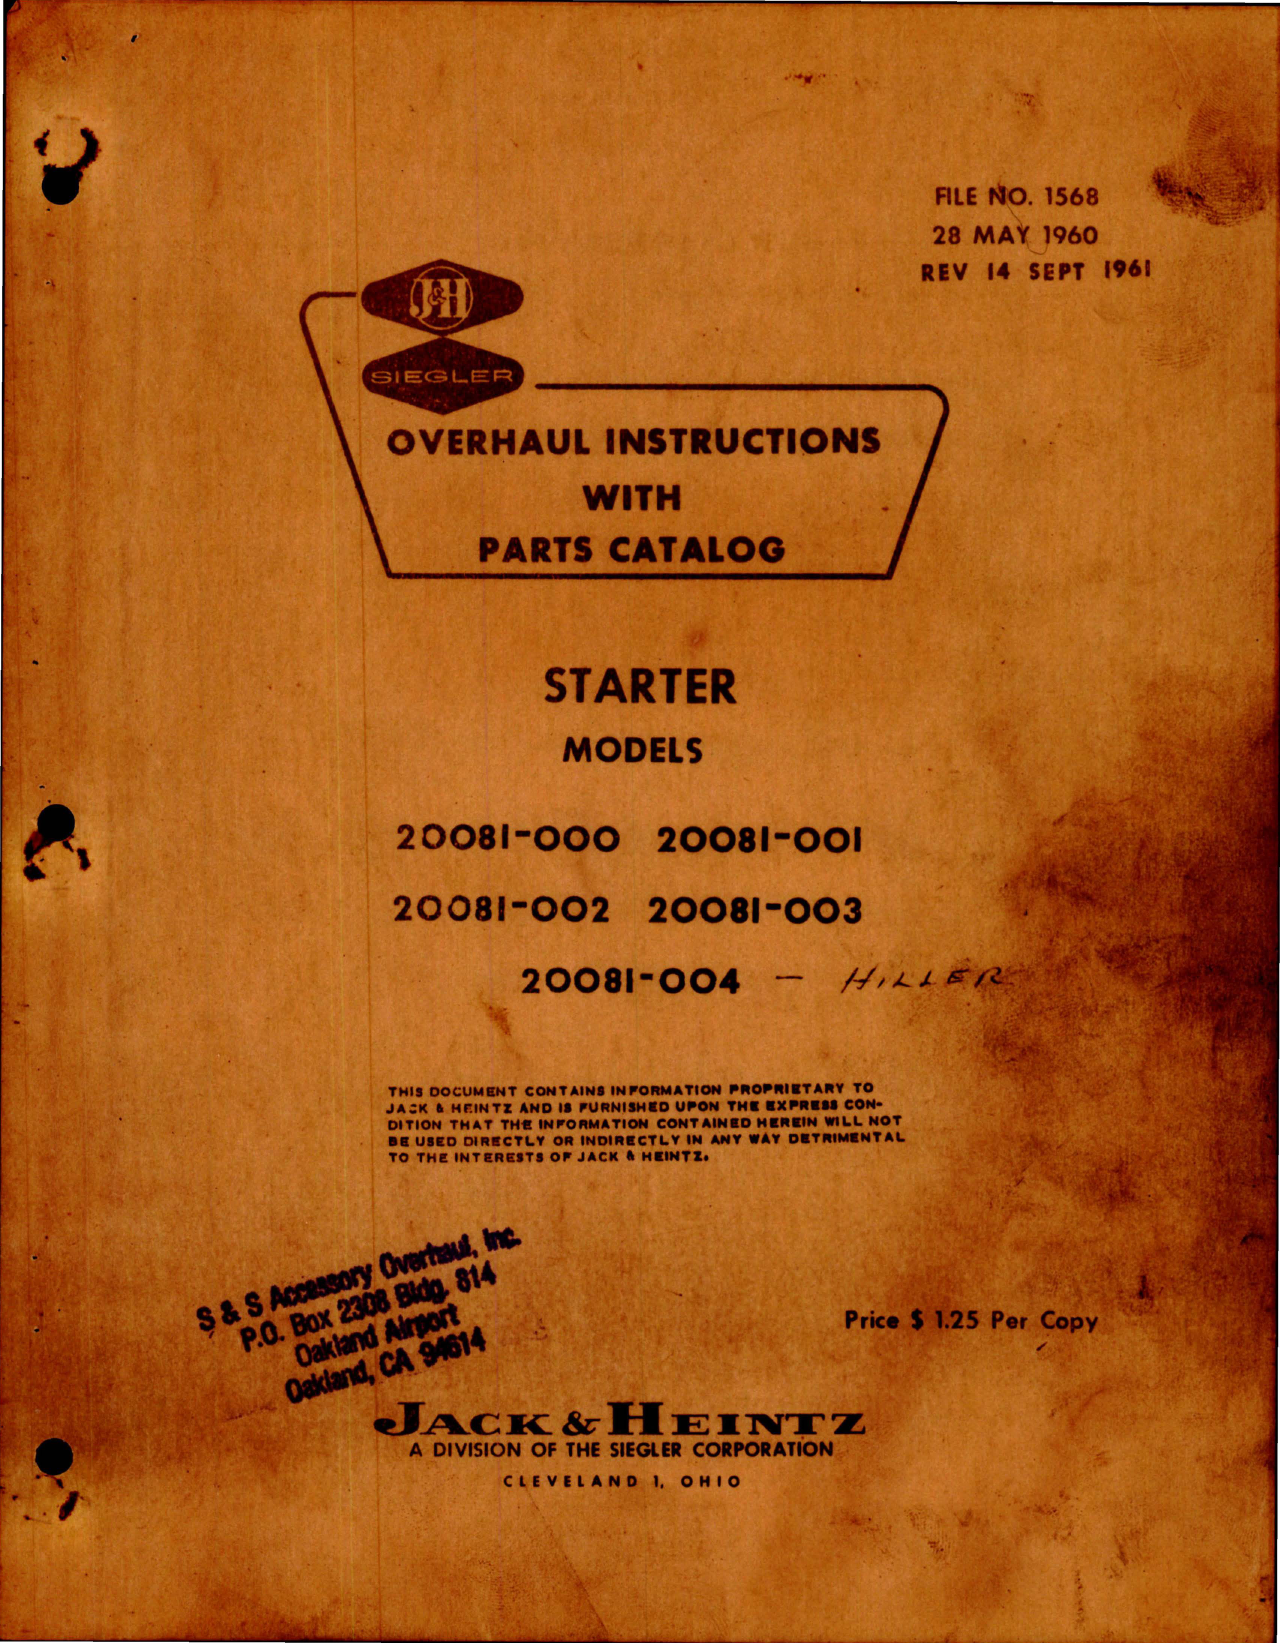 Sample page 1 from AirCorps Library document: Overhaul Instructions with Parts Catalog for Starter 